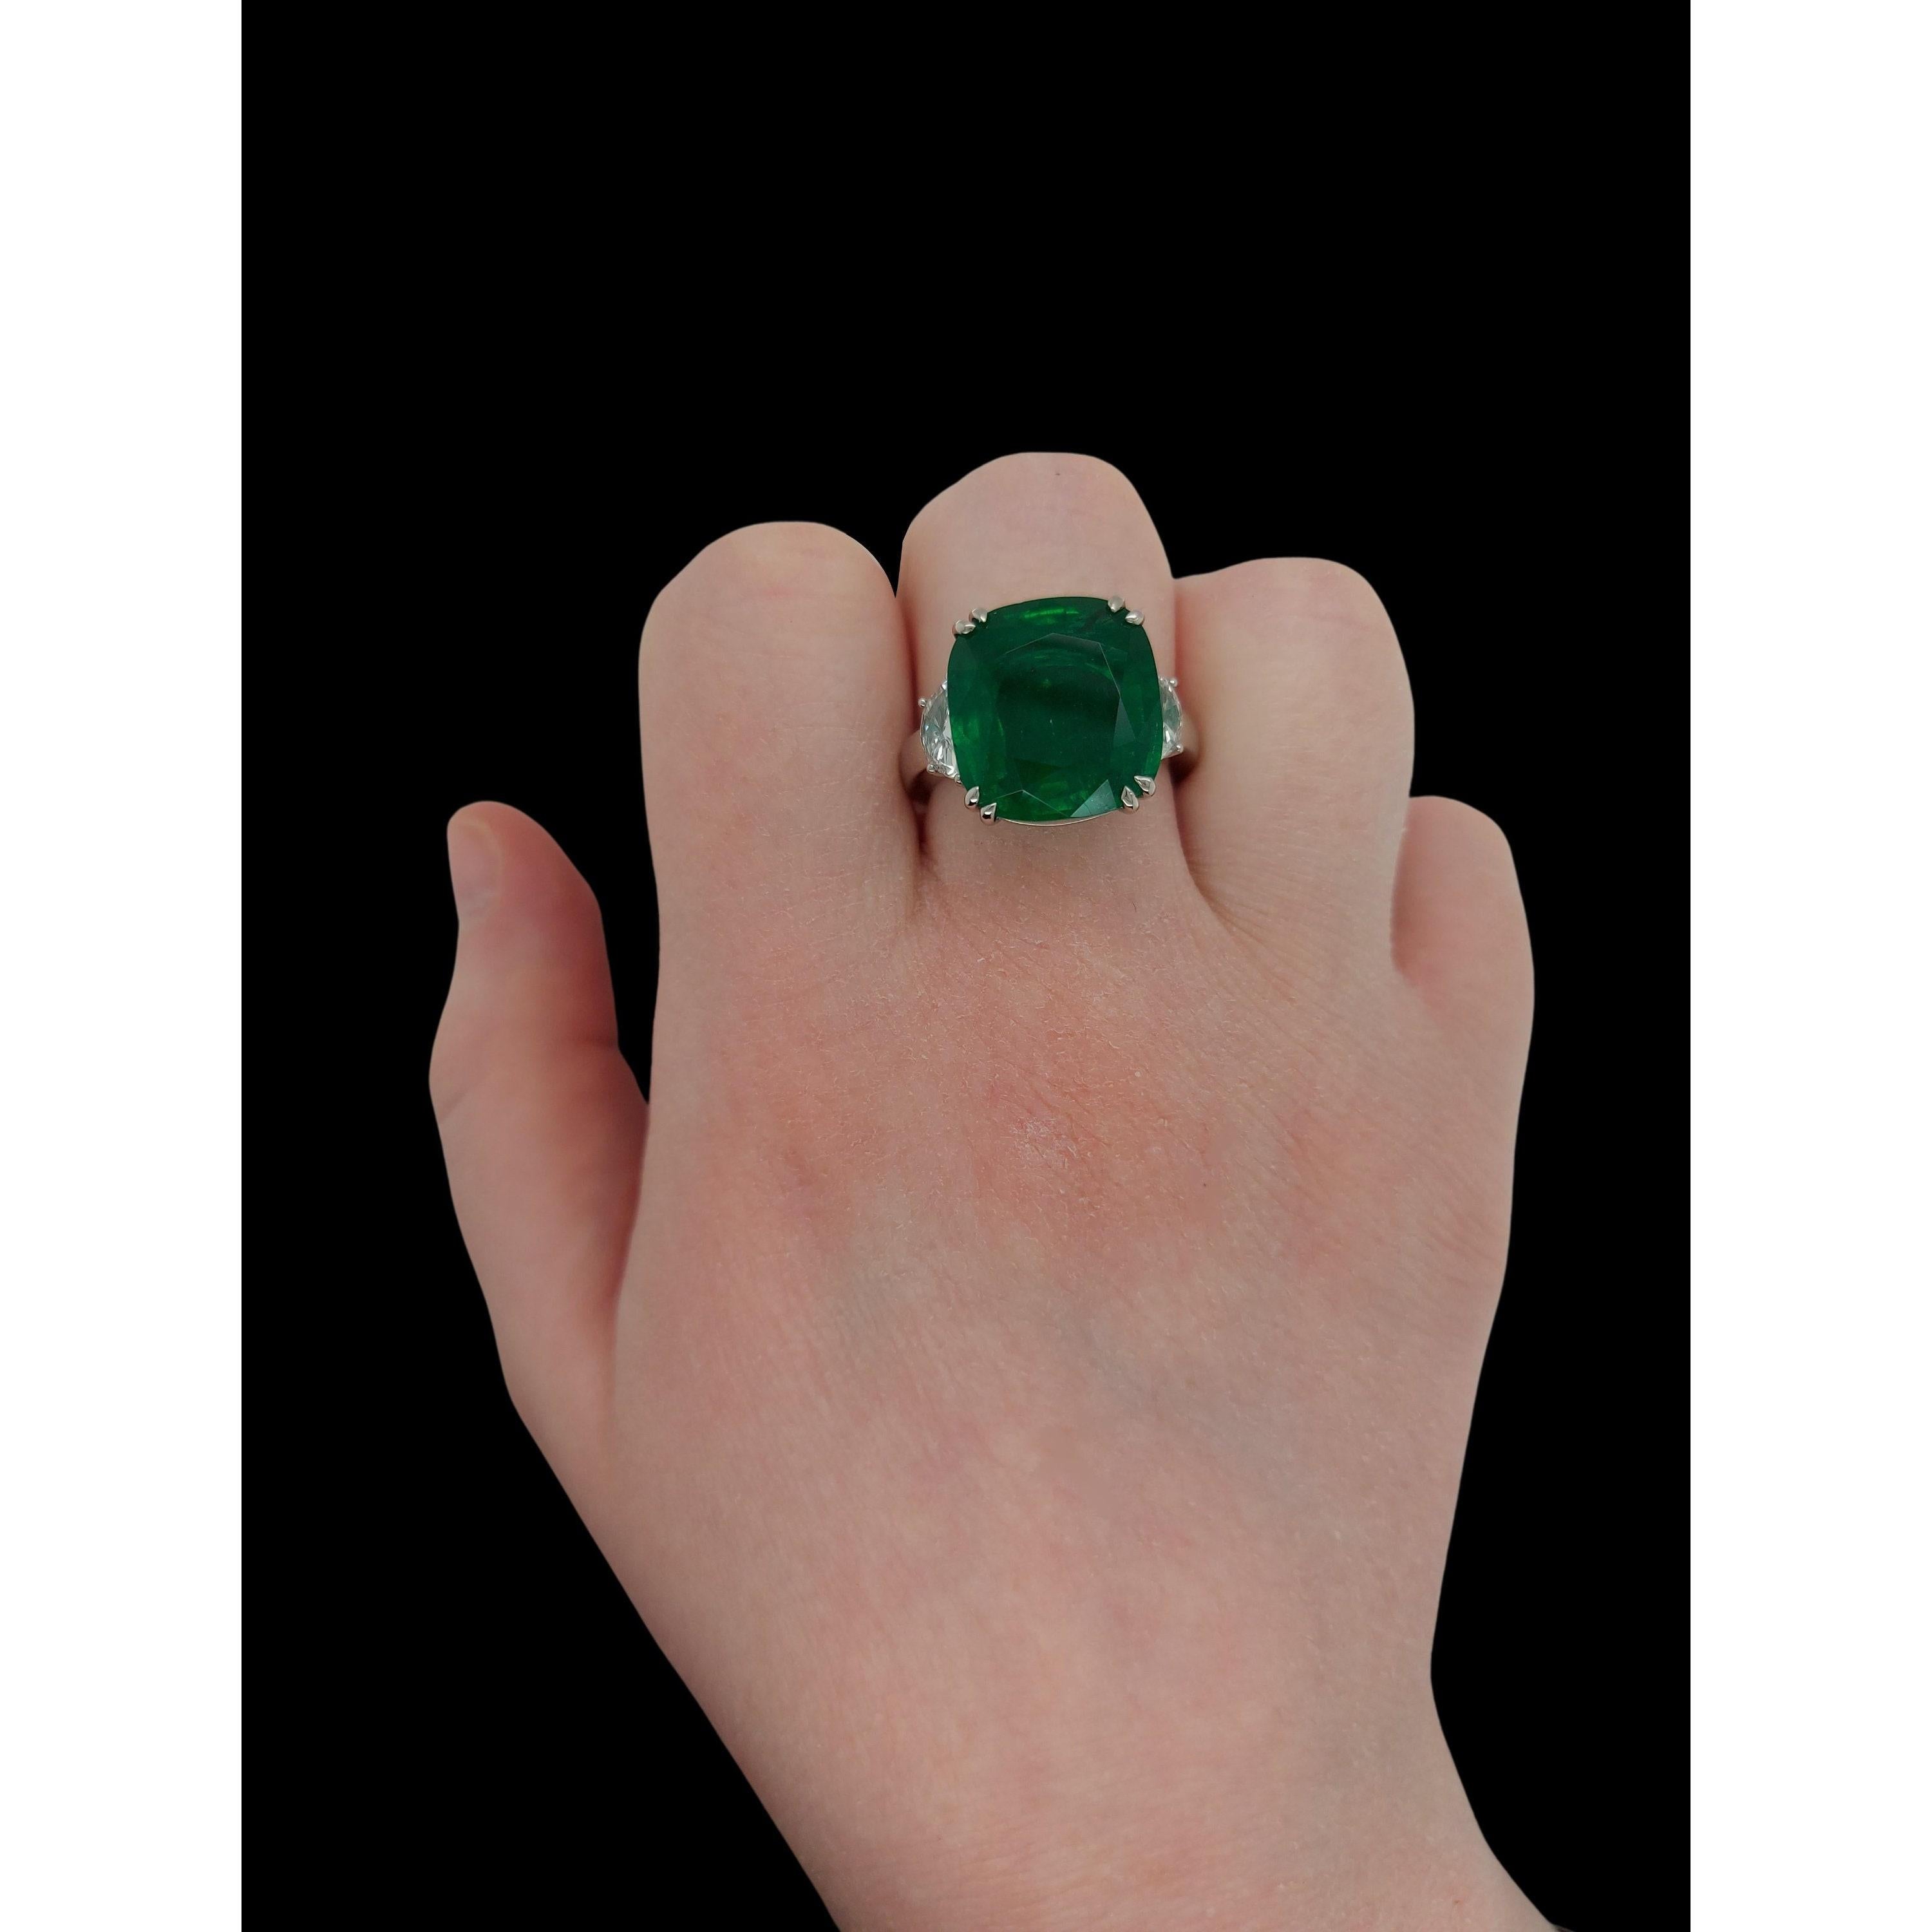 For Sale:  18K Gold 5 CT Natural Emerald and Diamond Antique Art Deco Style Engagement Ring 2